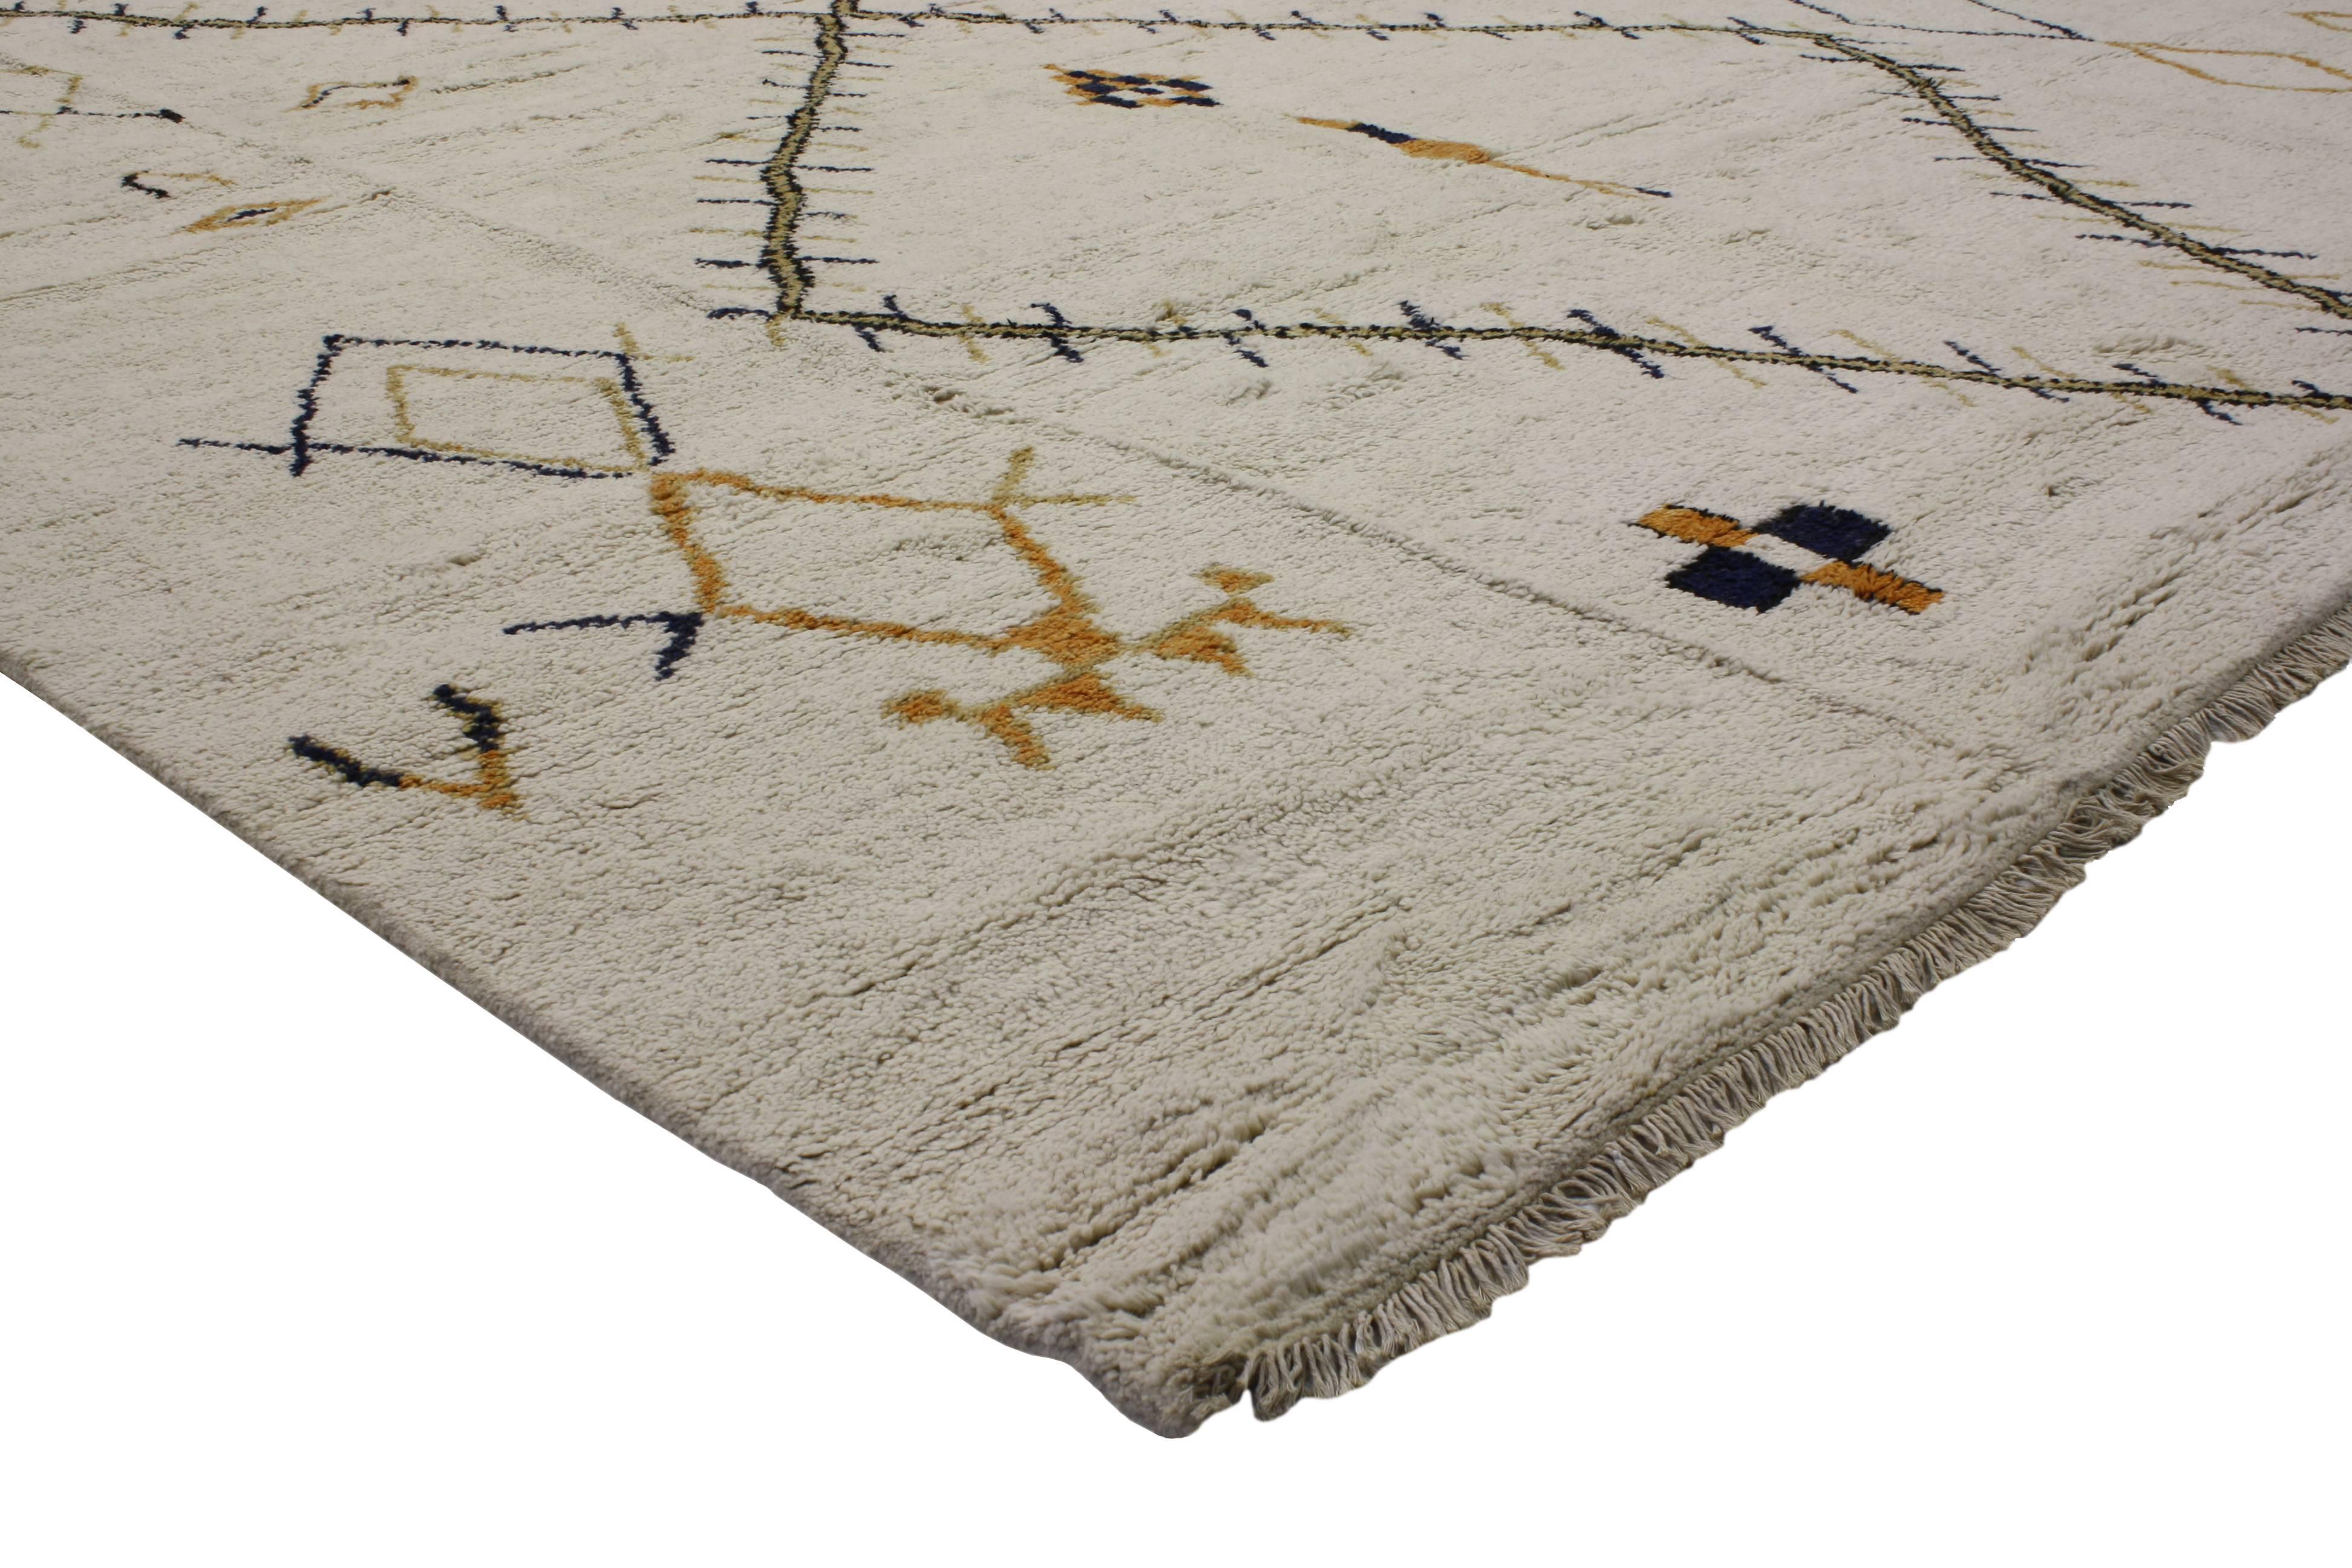 This Moroccan area rug harmonizes disparate elements, brings soothing serenity while adding texture and depth to your space. Featuring plush piled wool and ancient talisman symbolism, this Primitive rug has the ability to connect the feel of nomadic